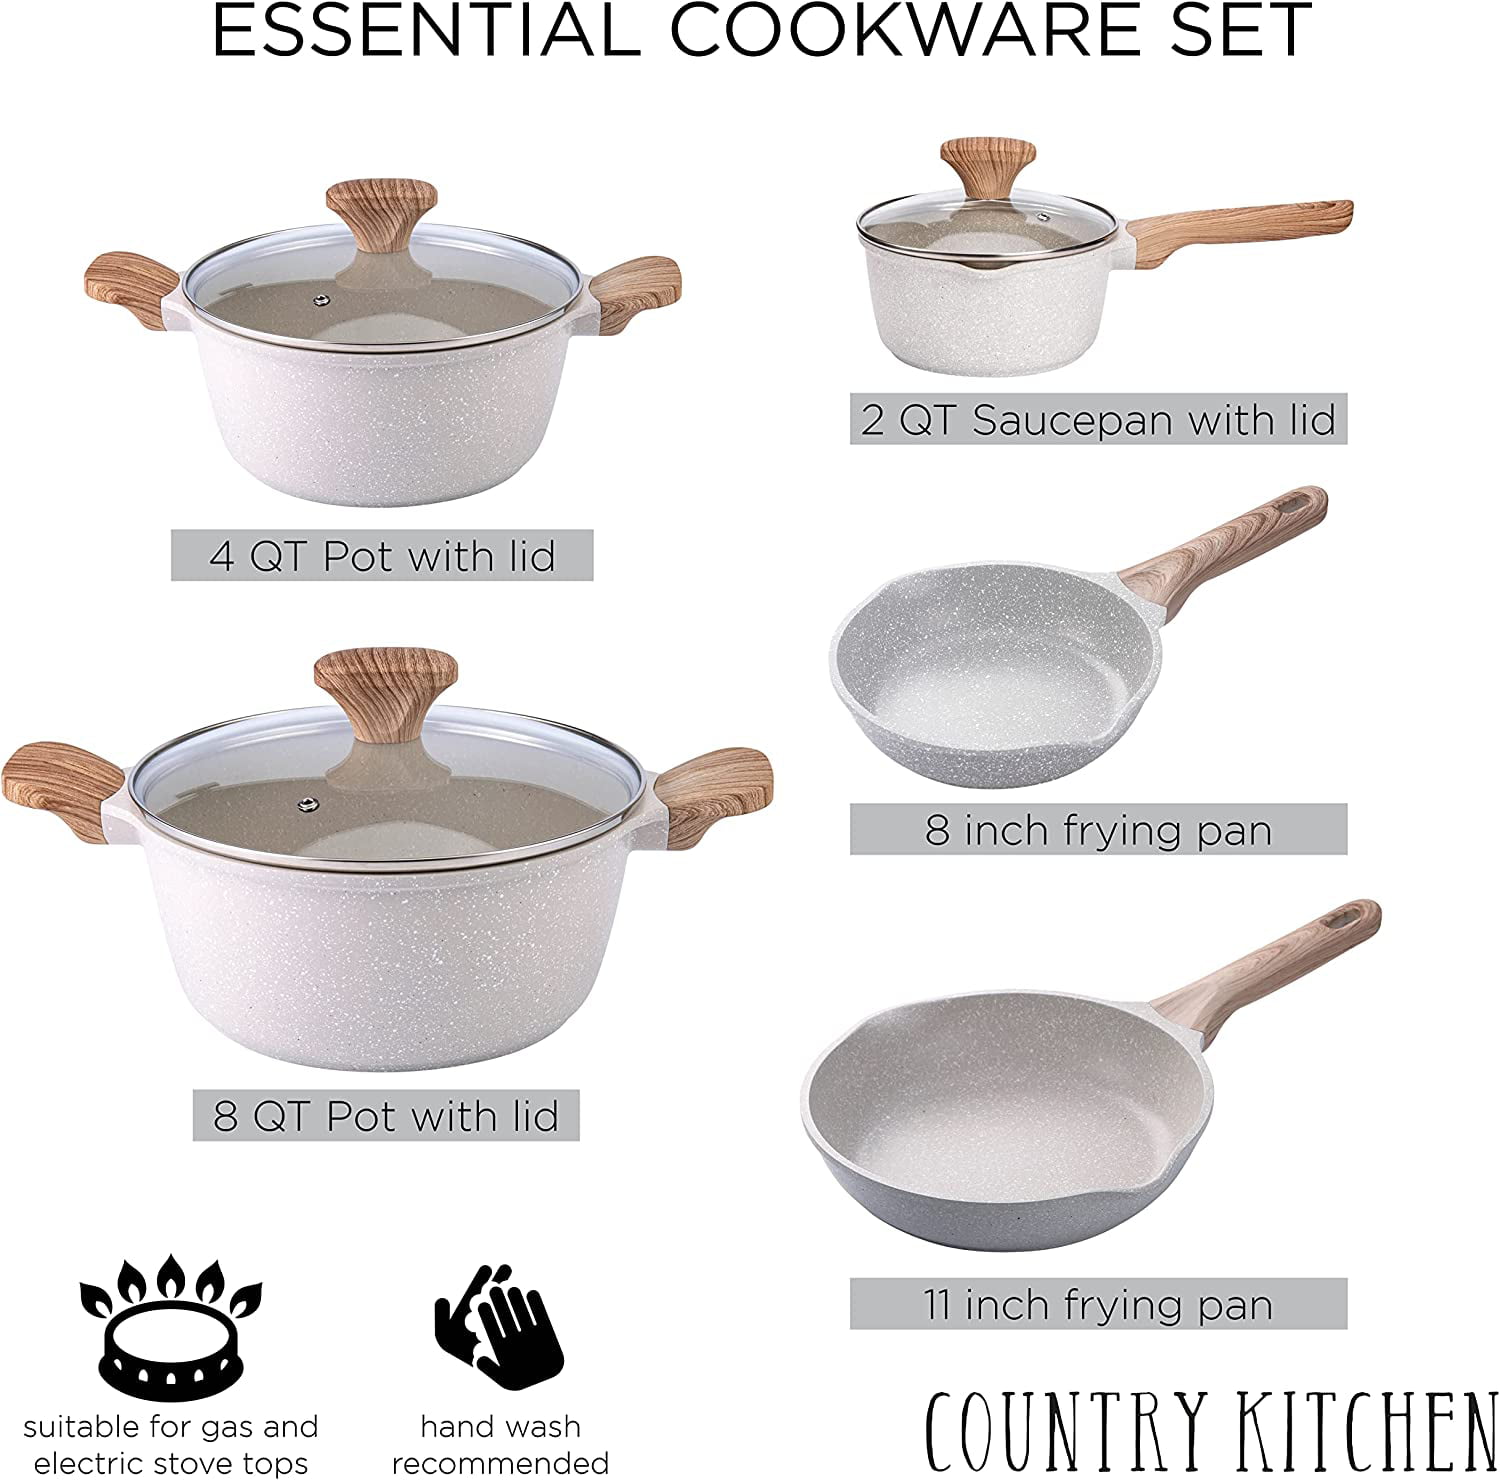 Country Kitchen country kitchen induction cookware sets - 8 piece nonstick  cast aluminum pots and pans with bakelite handles - non-toxic - sp